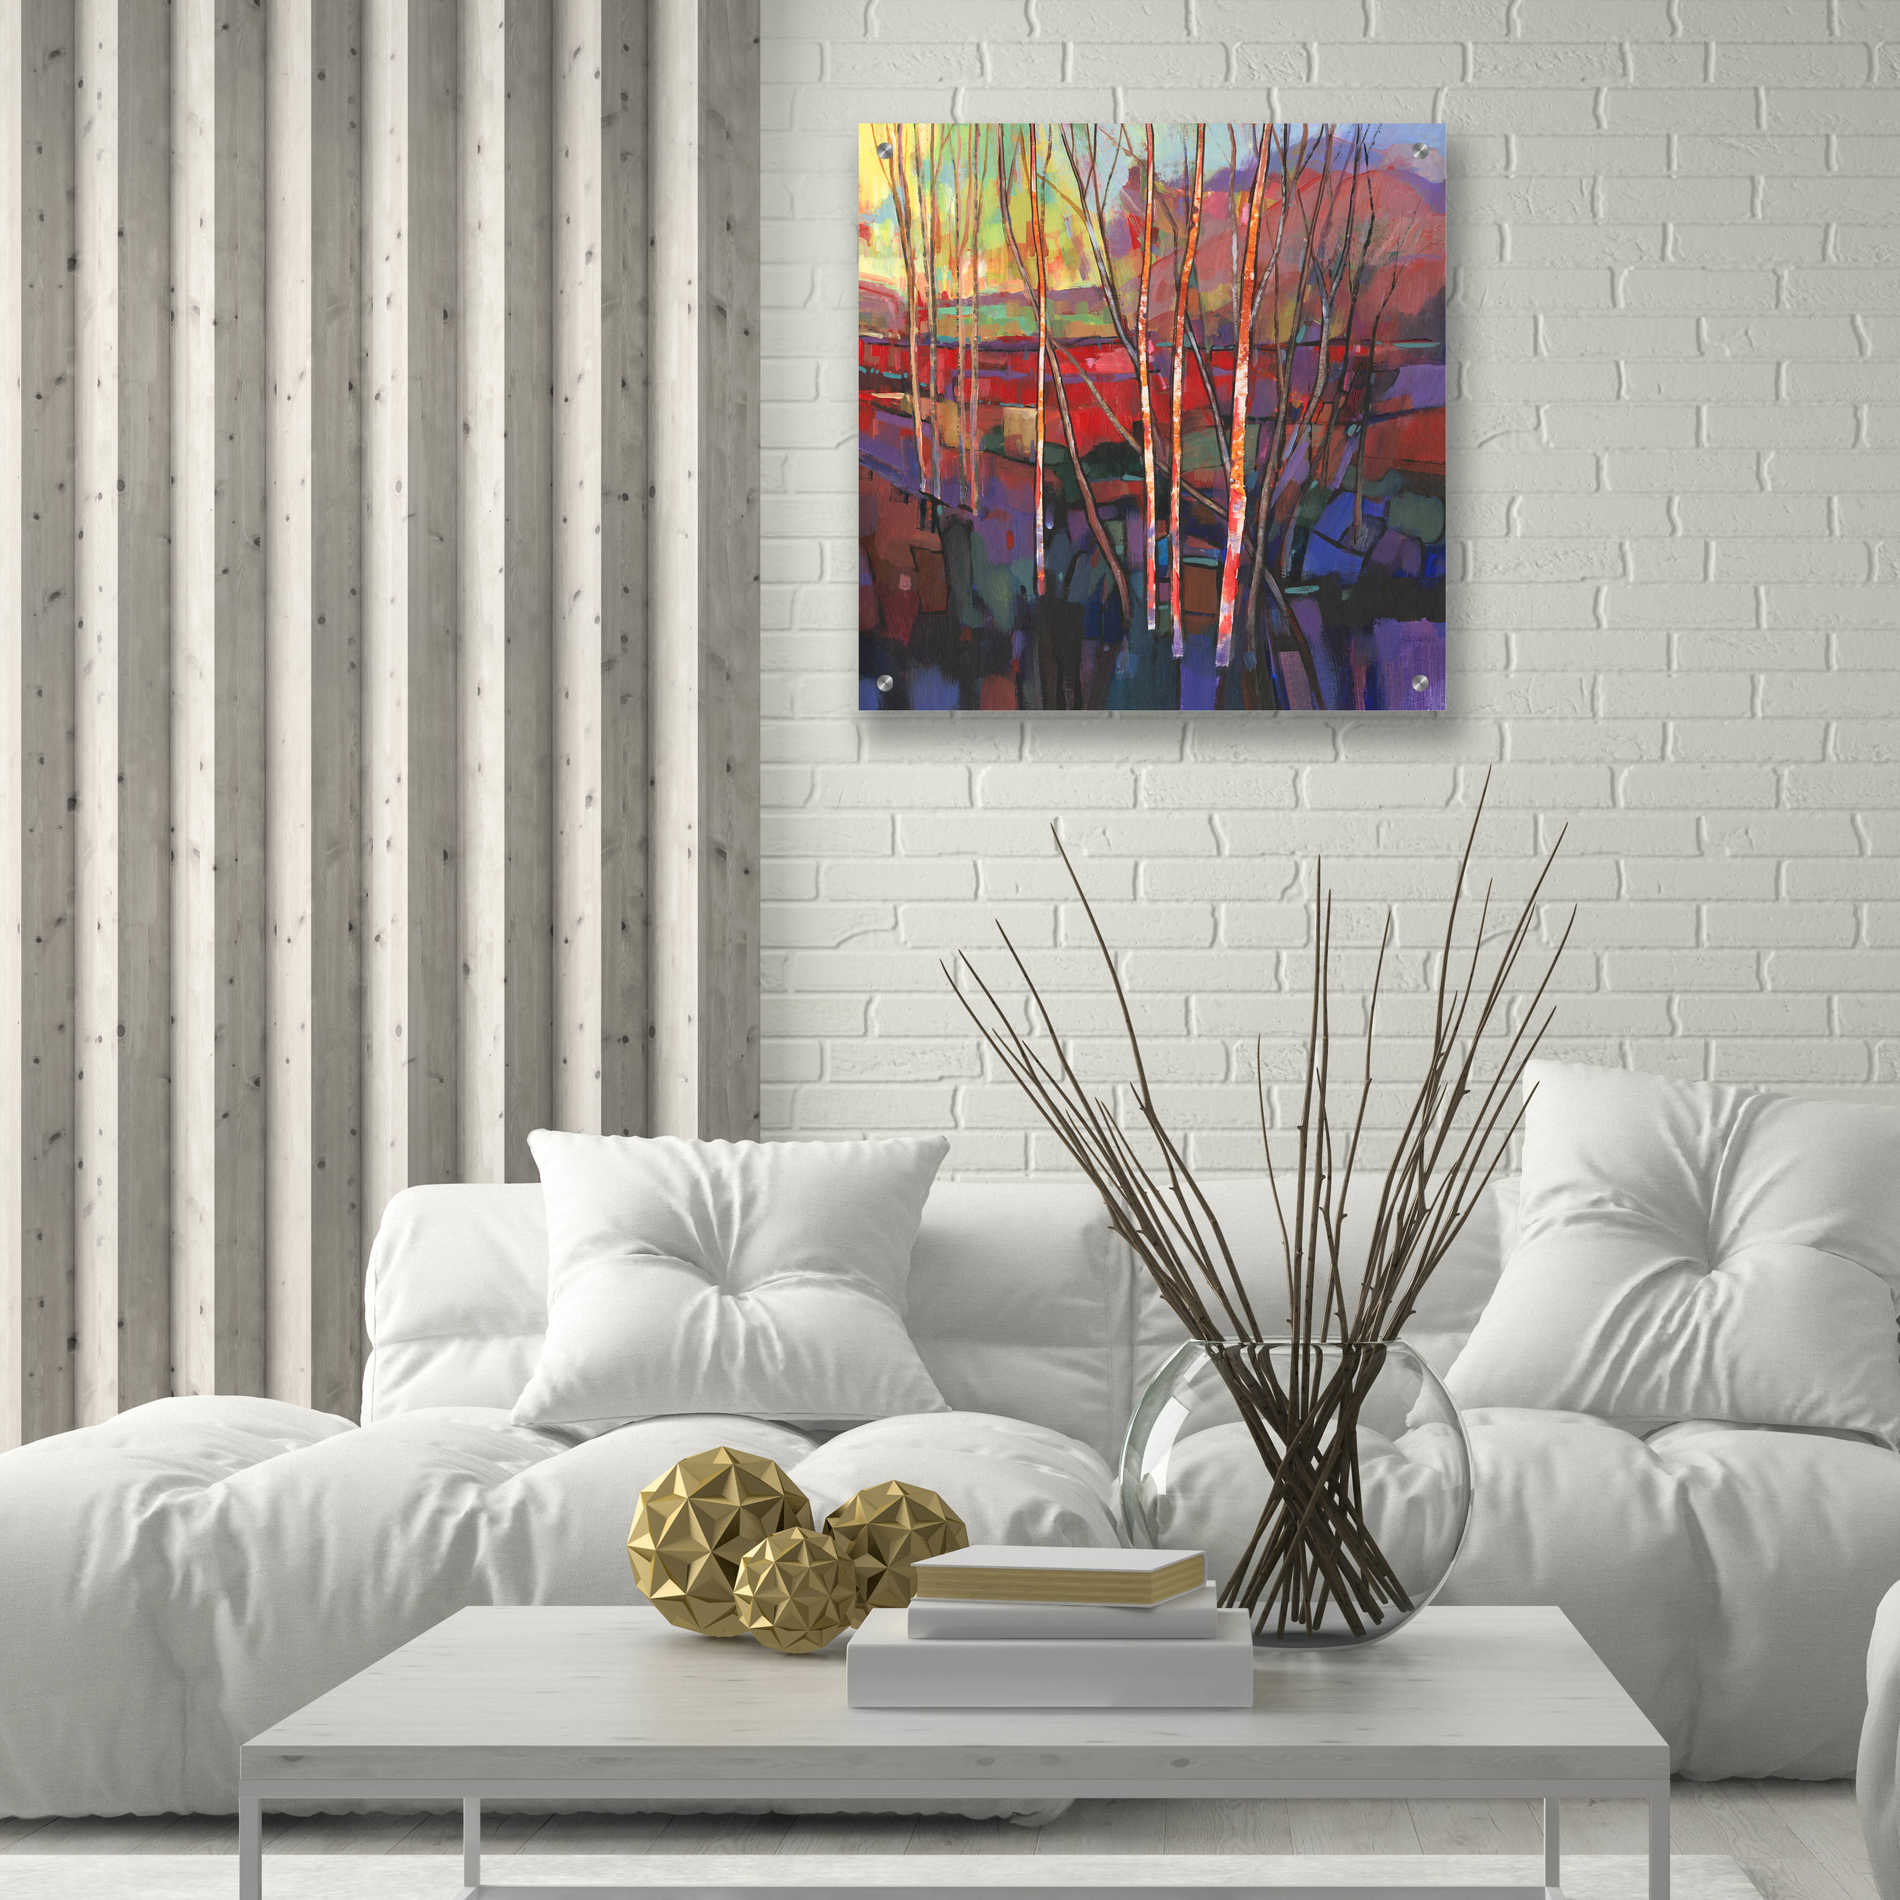 Epic Art 'Patchwork Trees I' by Tim O'Toole, Acrylic Glass Wall Art,24x24